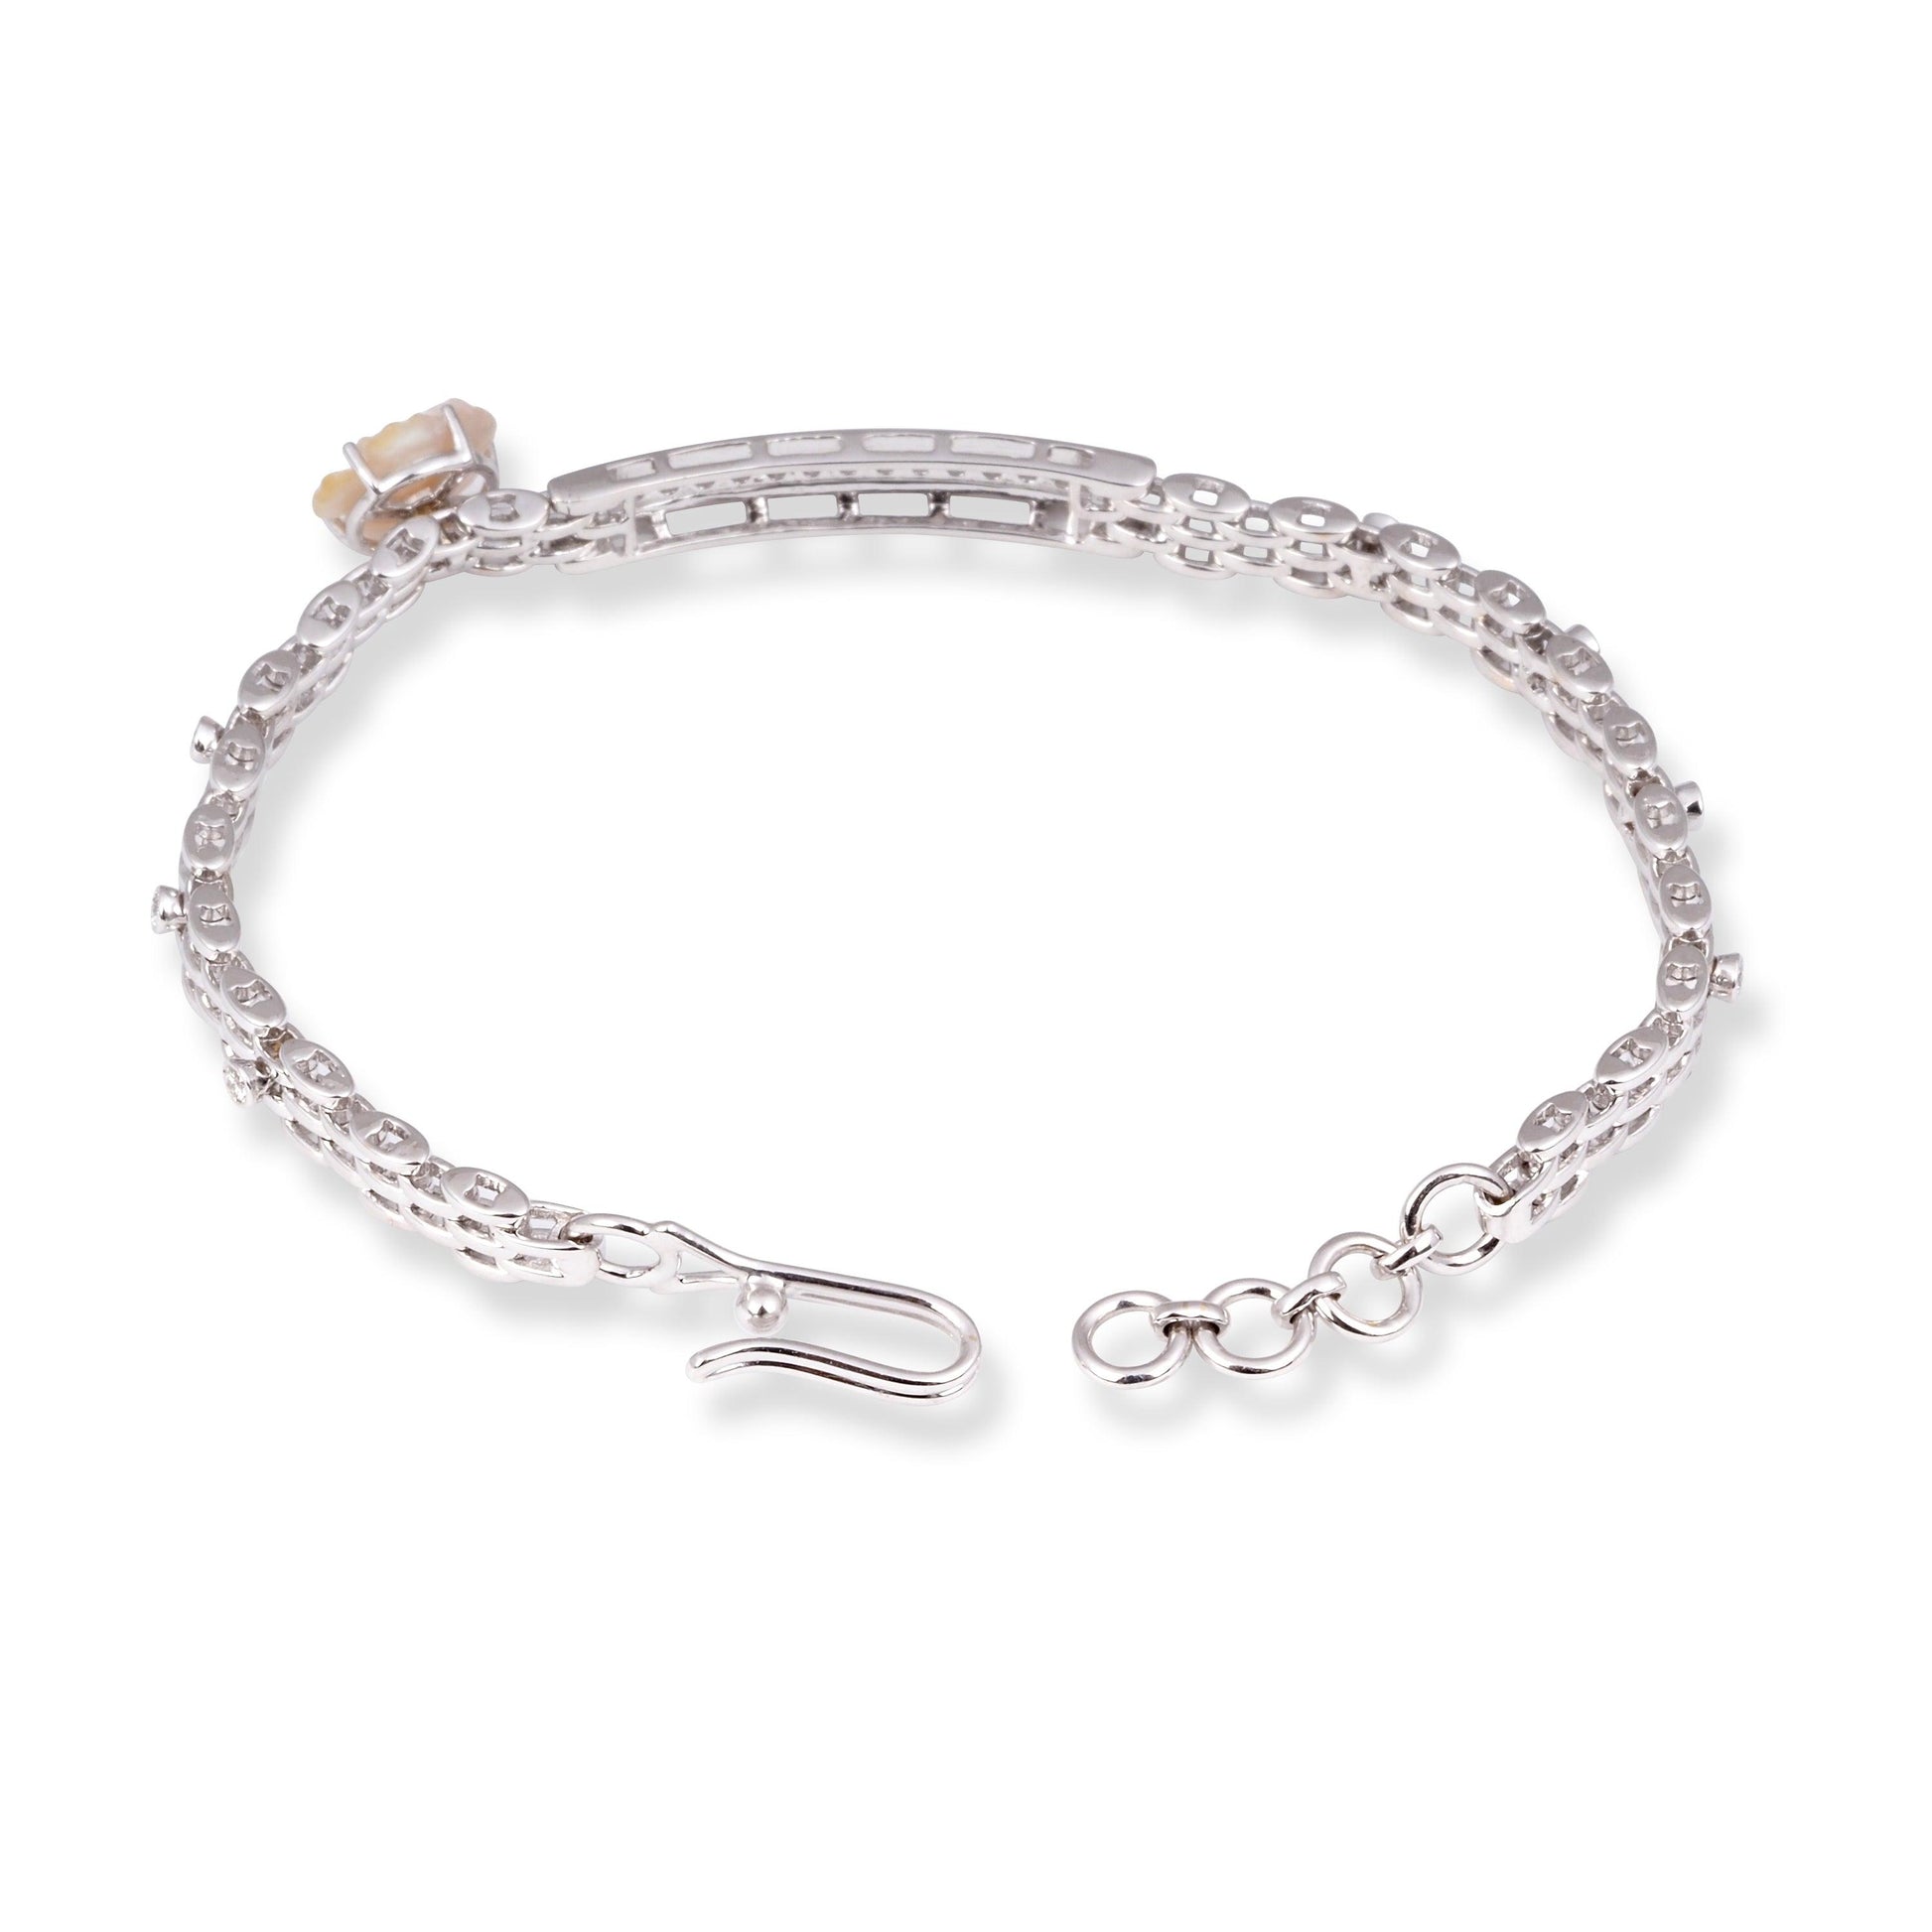 18ct White Gold Pavé Diamond and Cultured Pearl ID Bracelet with Flower Accent MCS6912 - Minar Jewellers